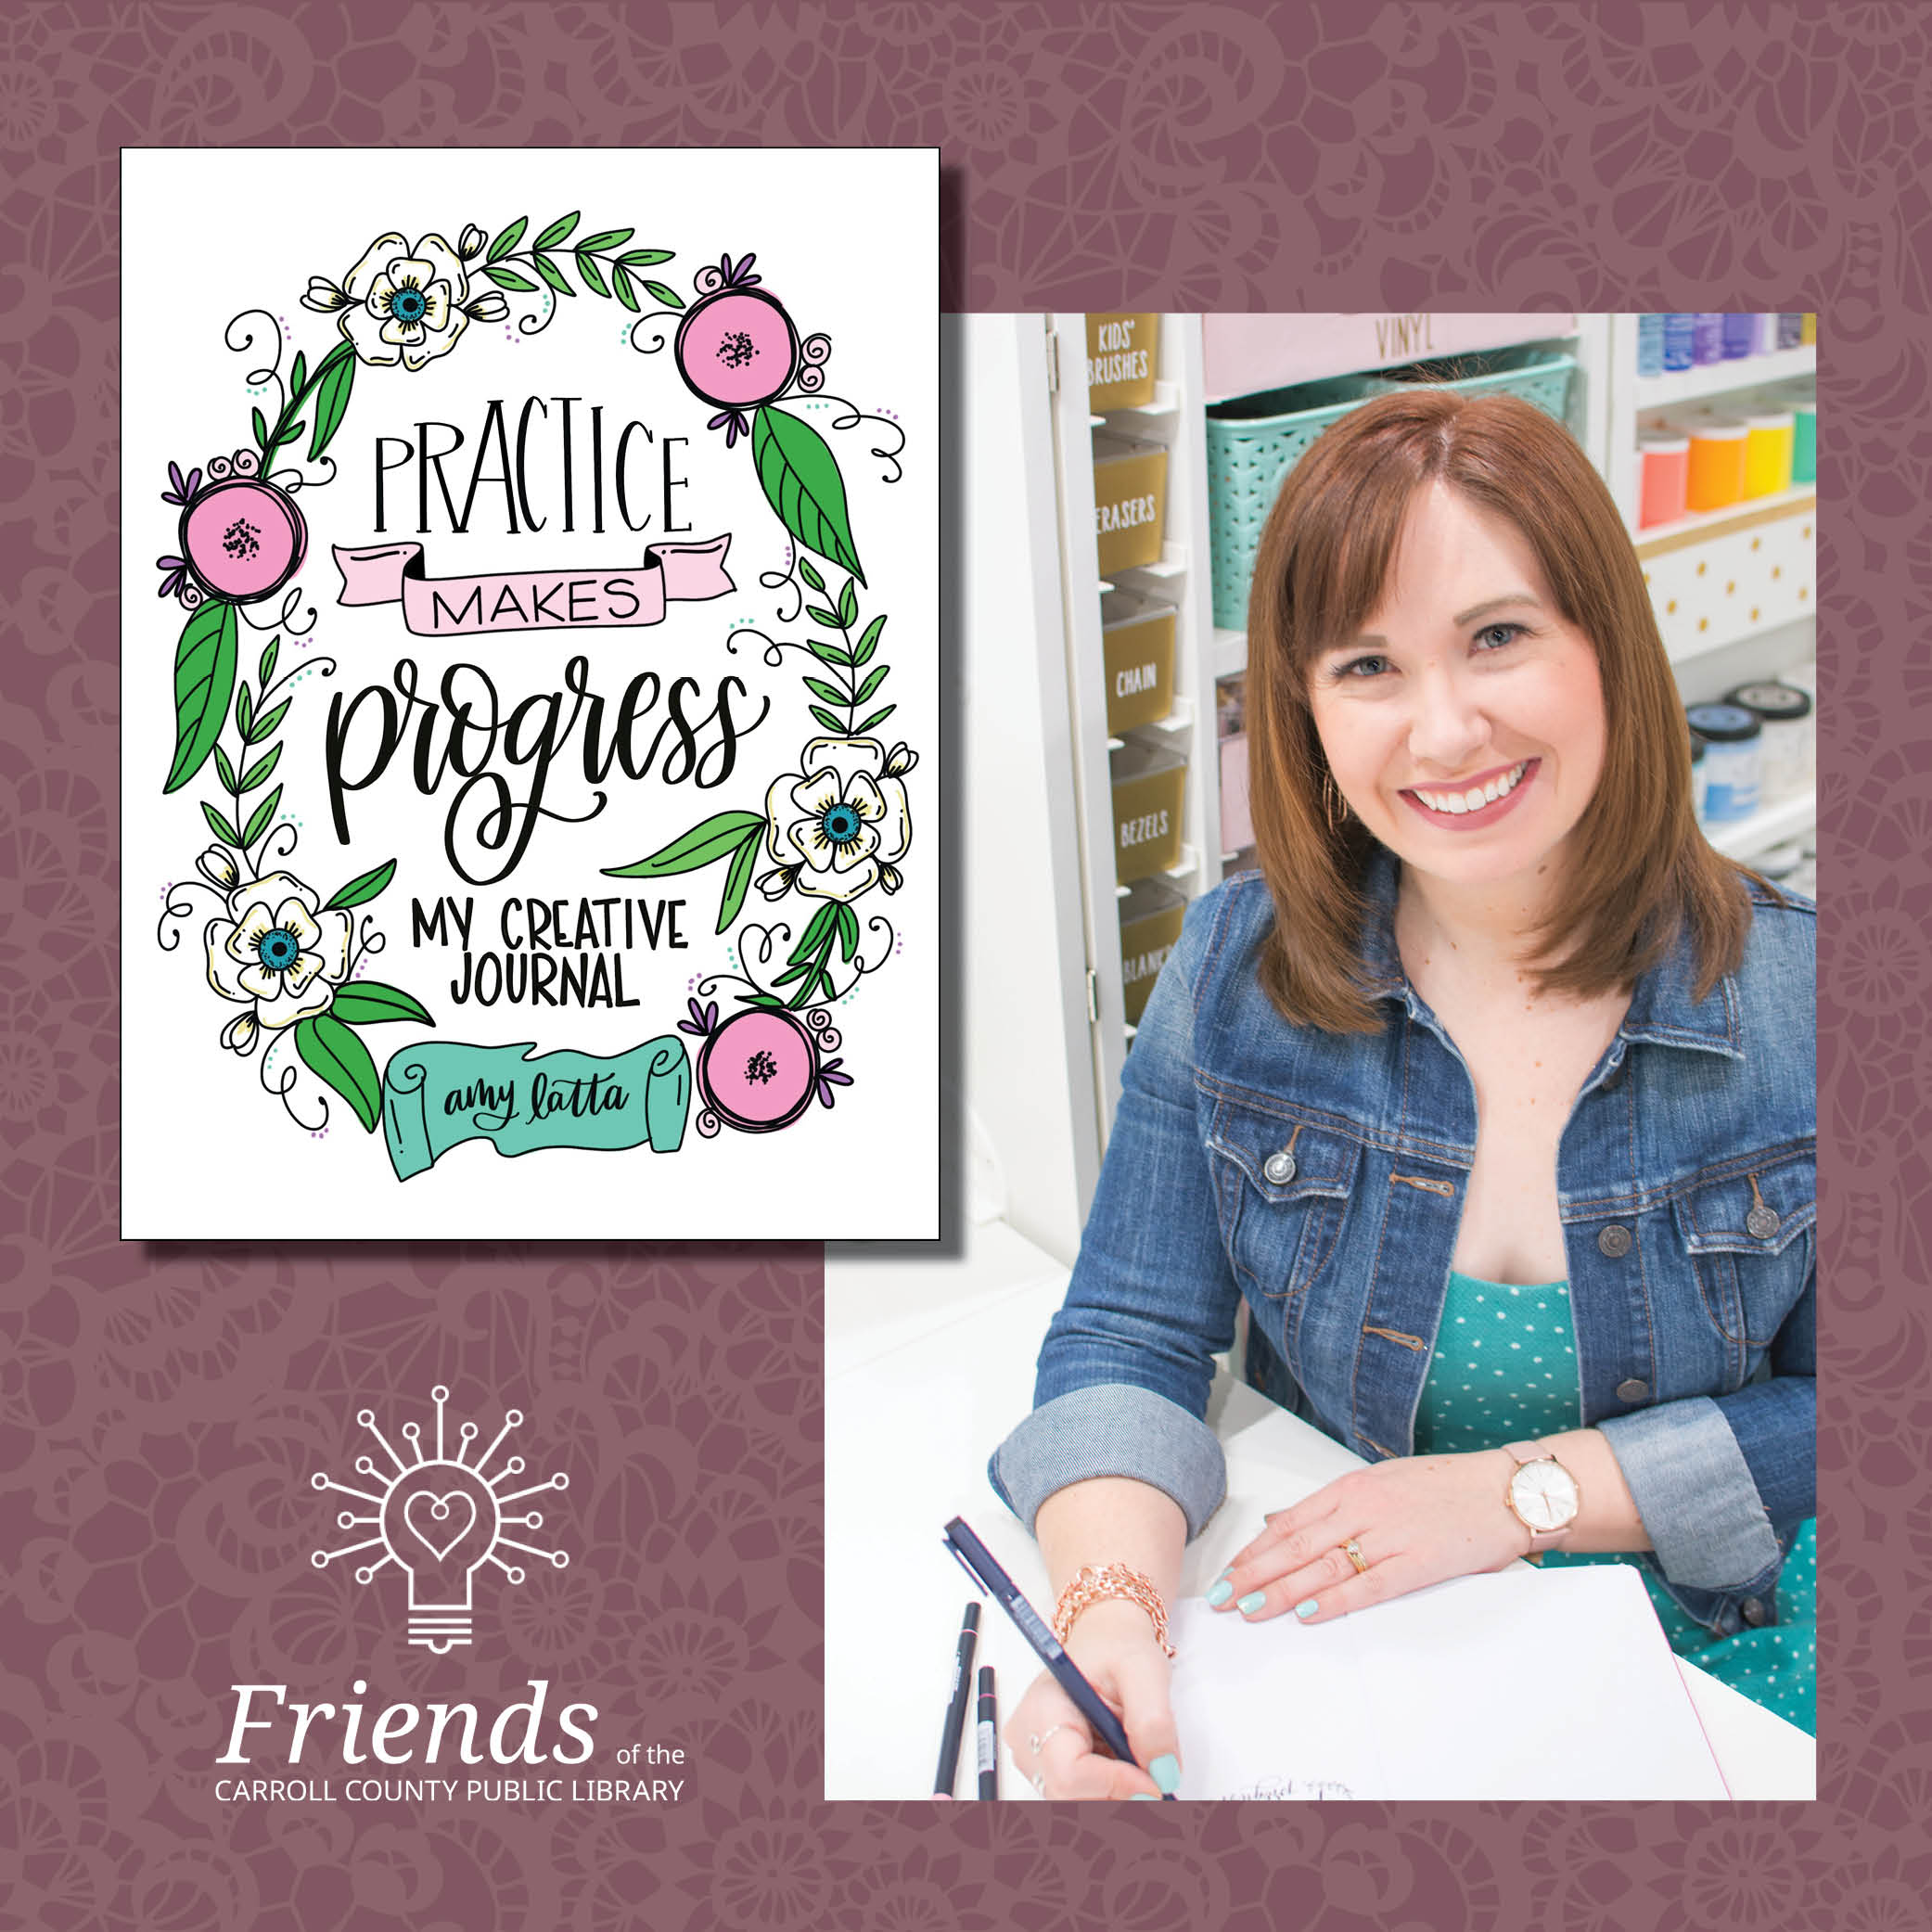 cover of Practice Makes Progress with woman author at desk